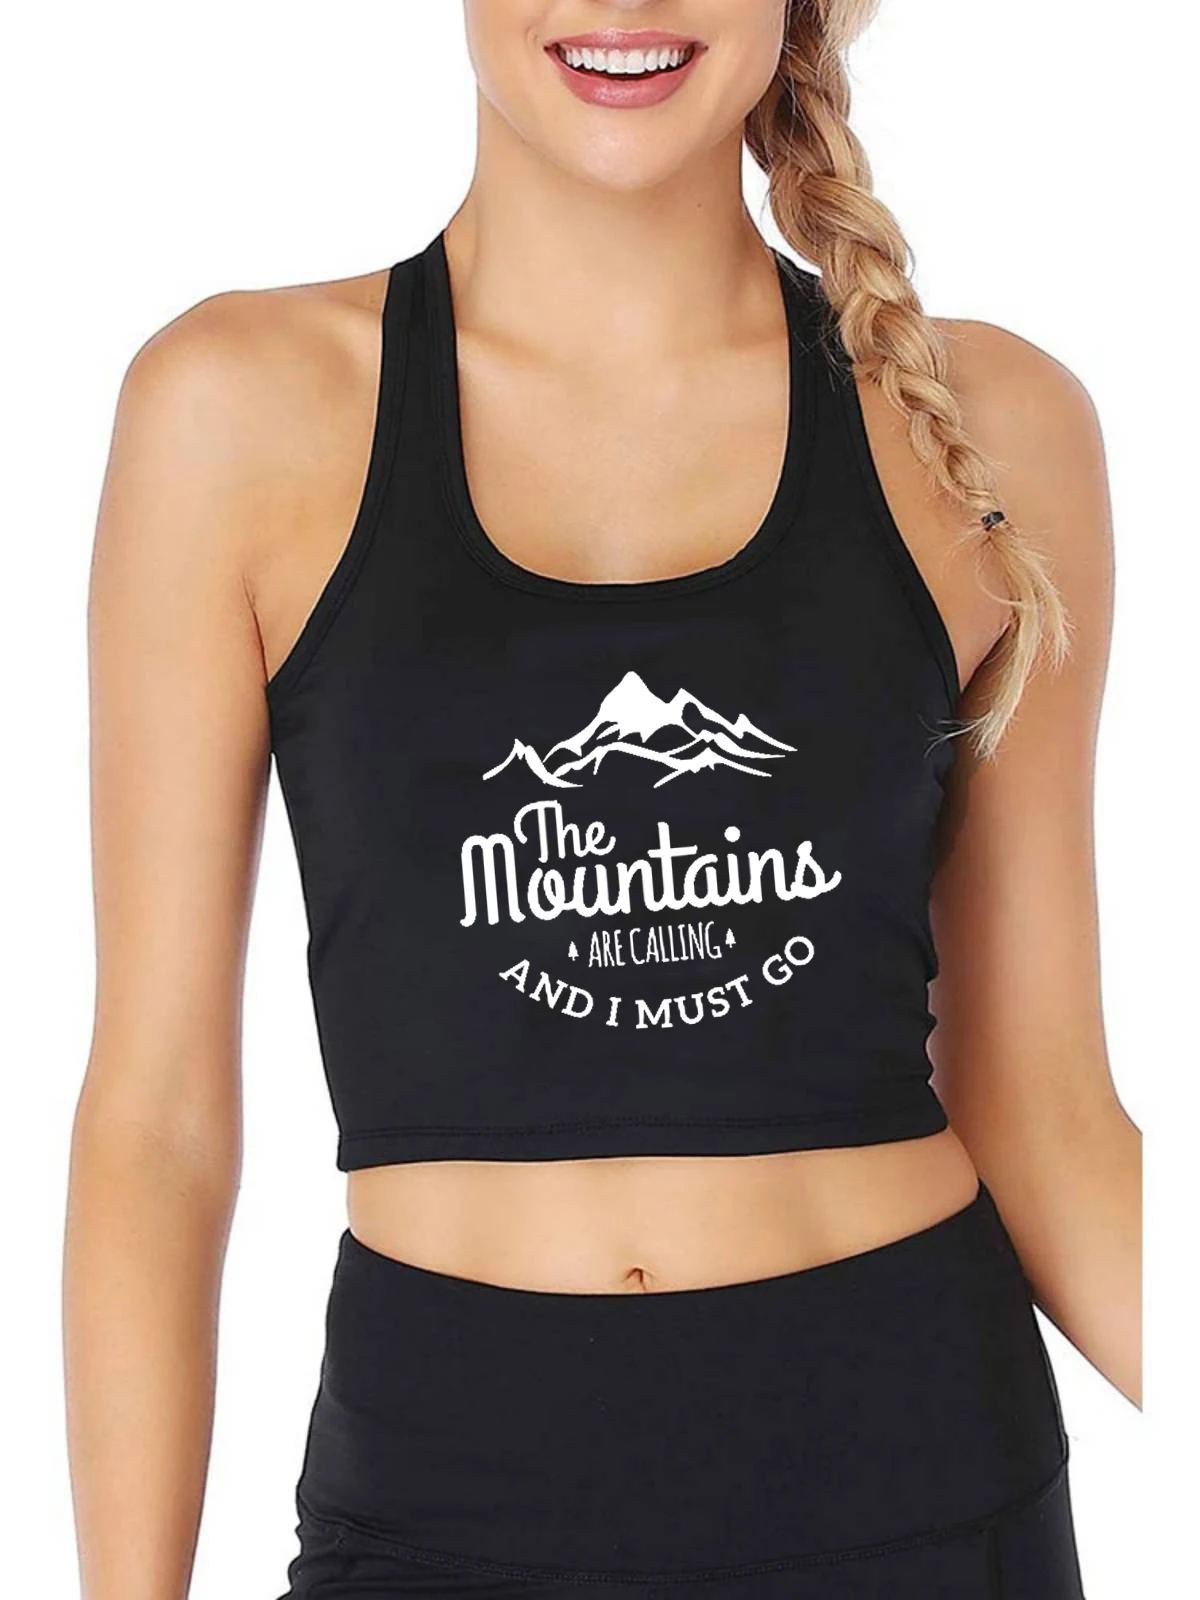 

The Mountains Are Calling And I Must Go Graphic Adventure Tank Tops Women's Breathable Slim Fit Yoga Sports Training Crop Tops